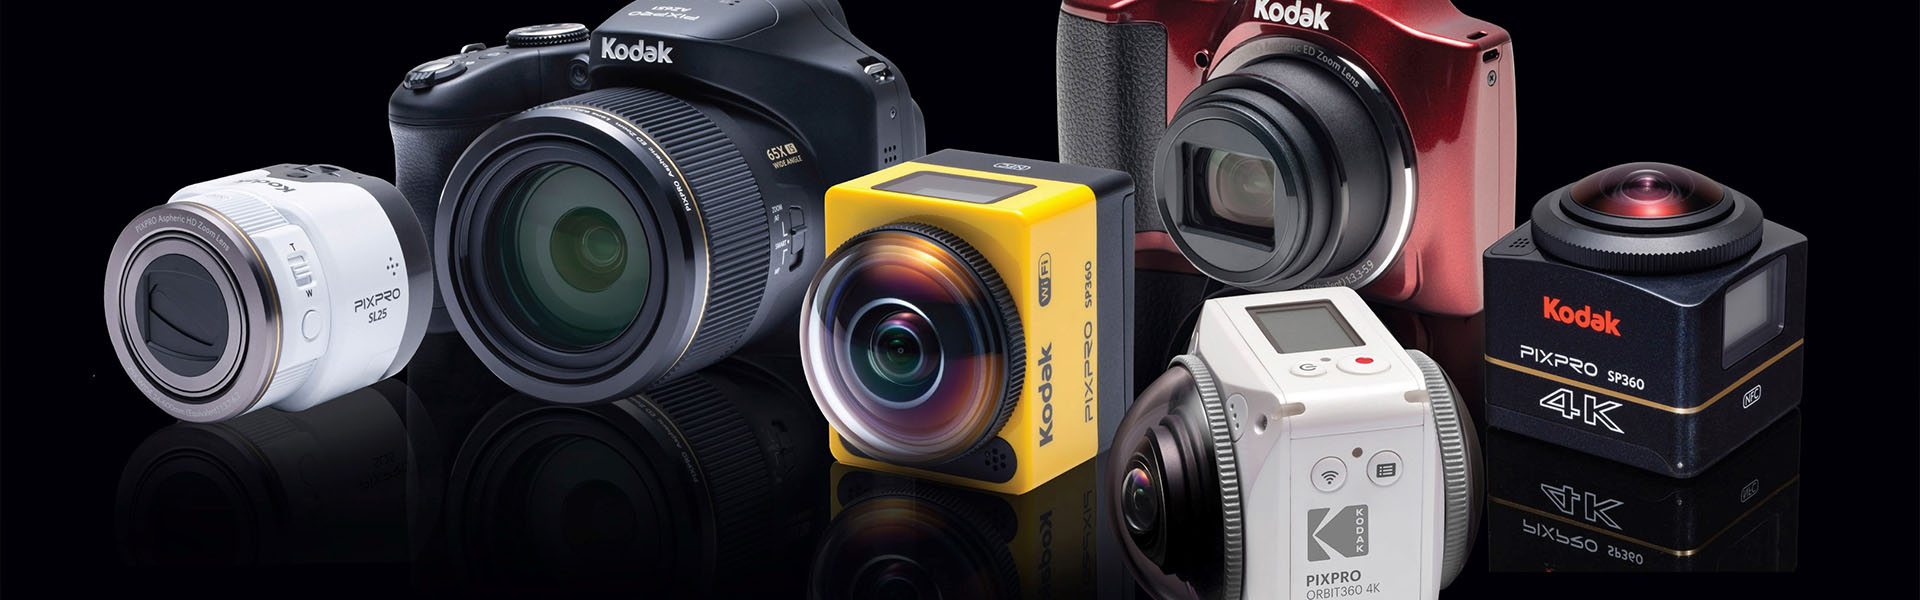 Kodak Pixpro Digital Camera and Devices Line Up Announced 12